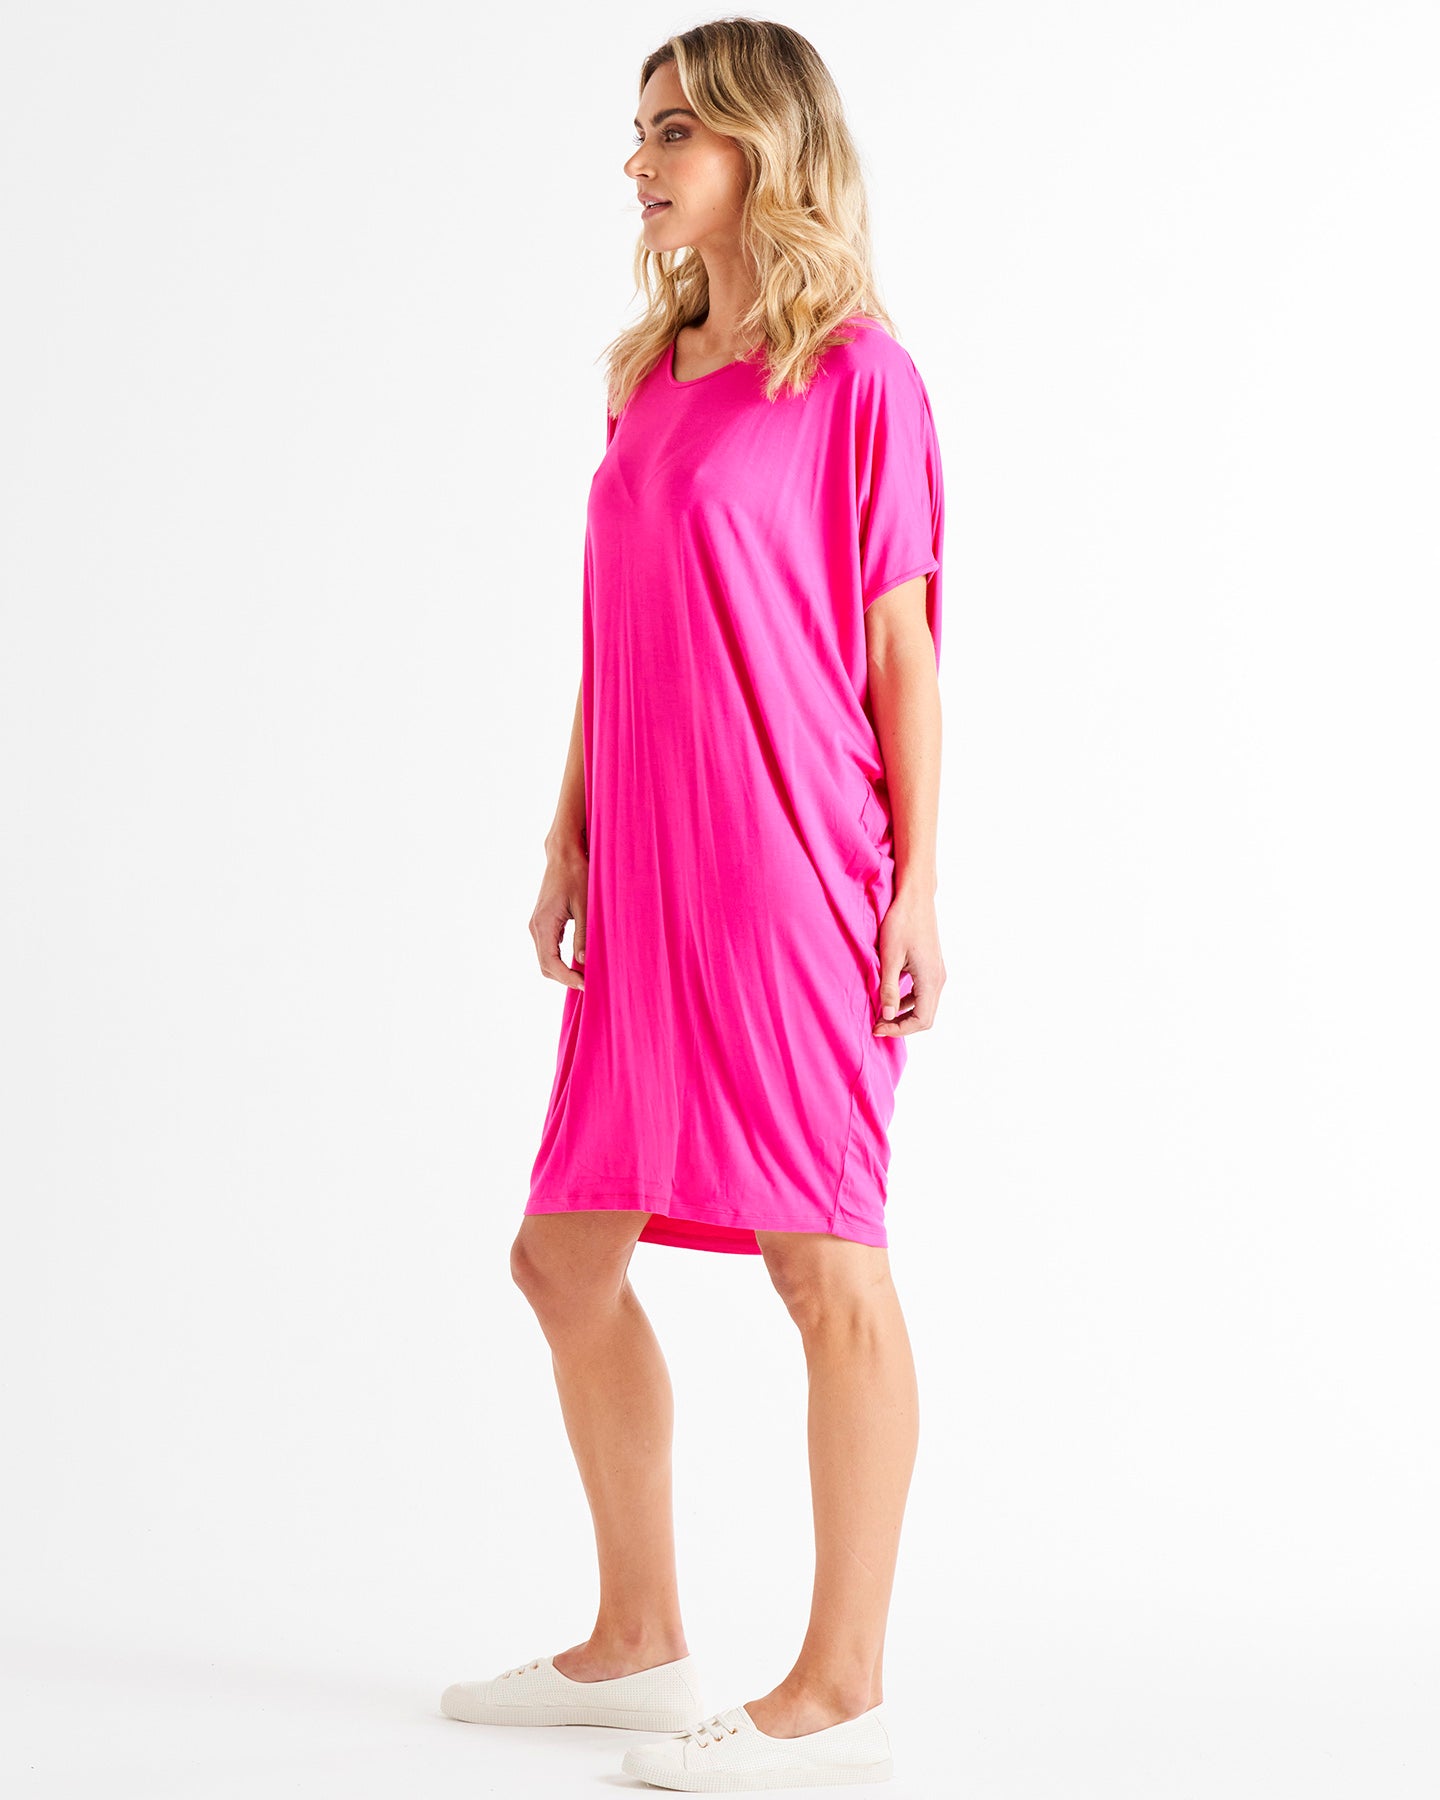 Maui Loose Fitting Stretchy Scoop Neck Batwing Above-Knee Dress - Raspberry